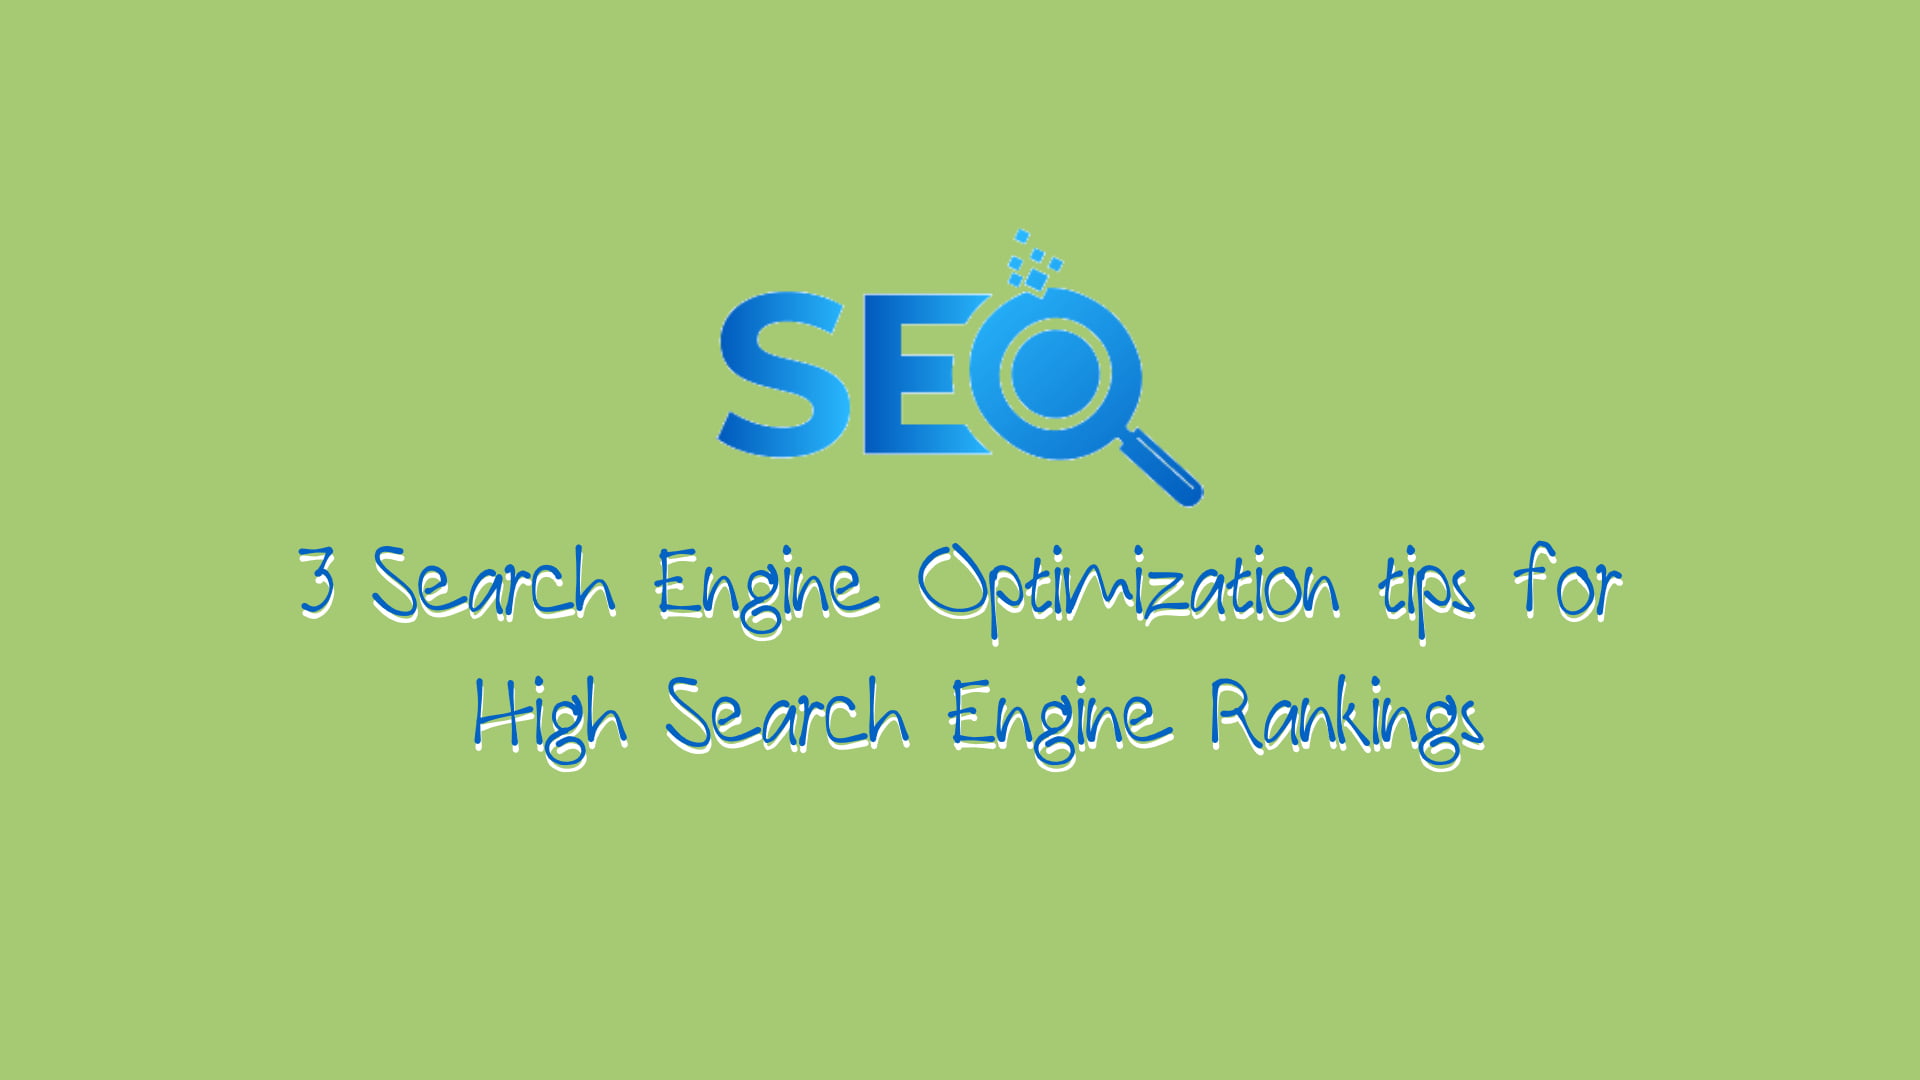 3 Search Engine Optimization tips for High Search Engine Rankings New Project2